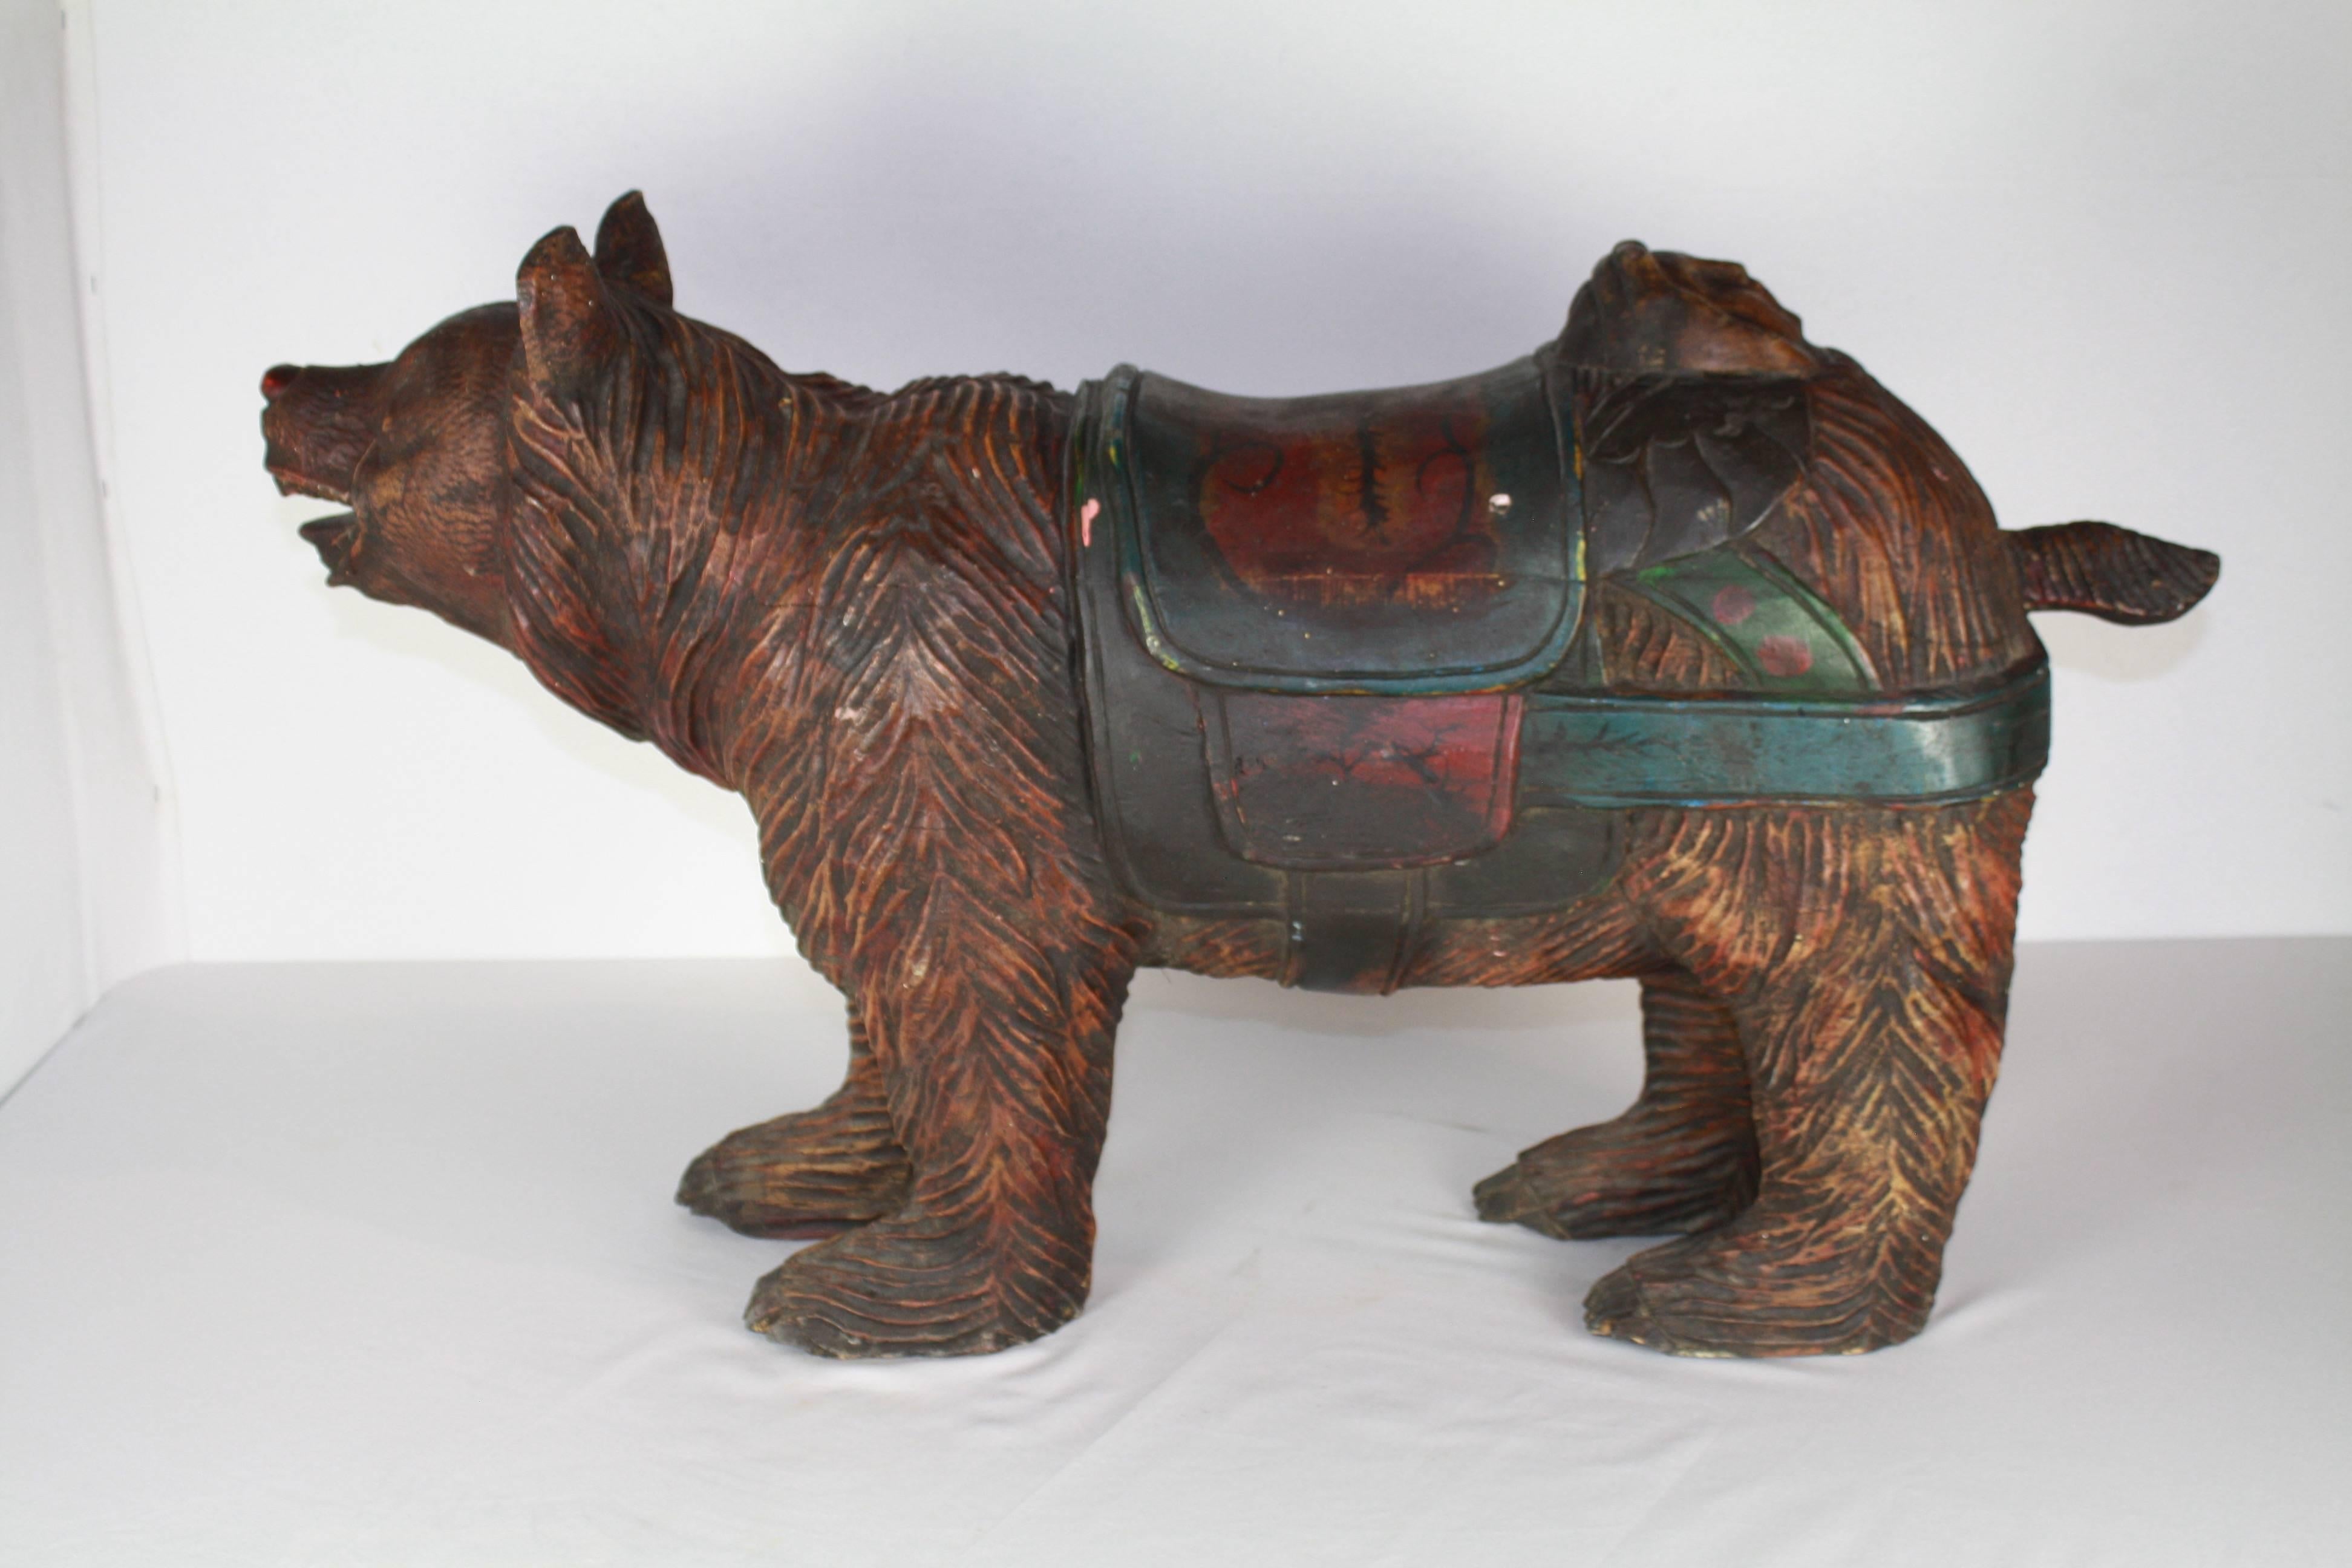 In the style of a late 19th-early 20th century carousel animal, this whimsical bear does not have the pole hole or bracket holes in the feet that would have designated it a carousel animal. A lovely green and red painted saddle adorned with a cherub